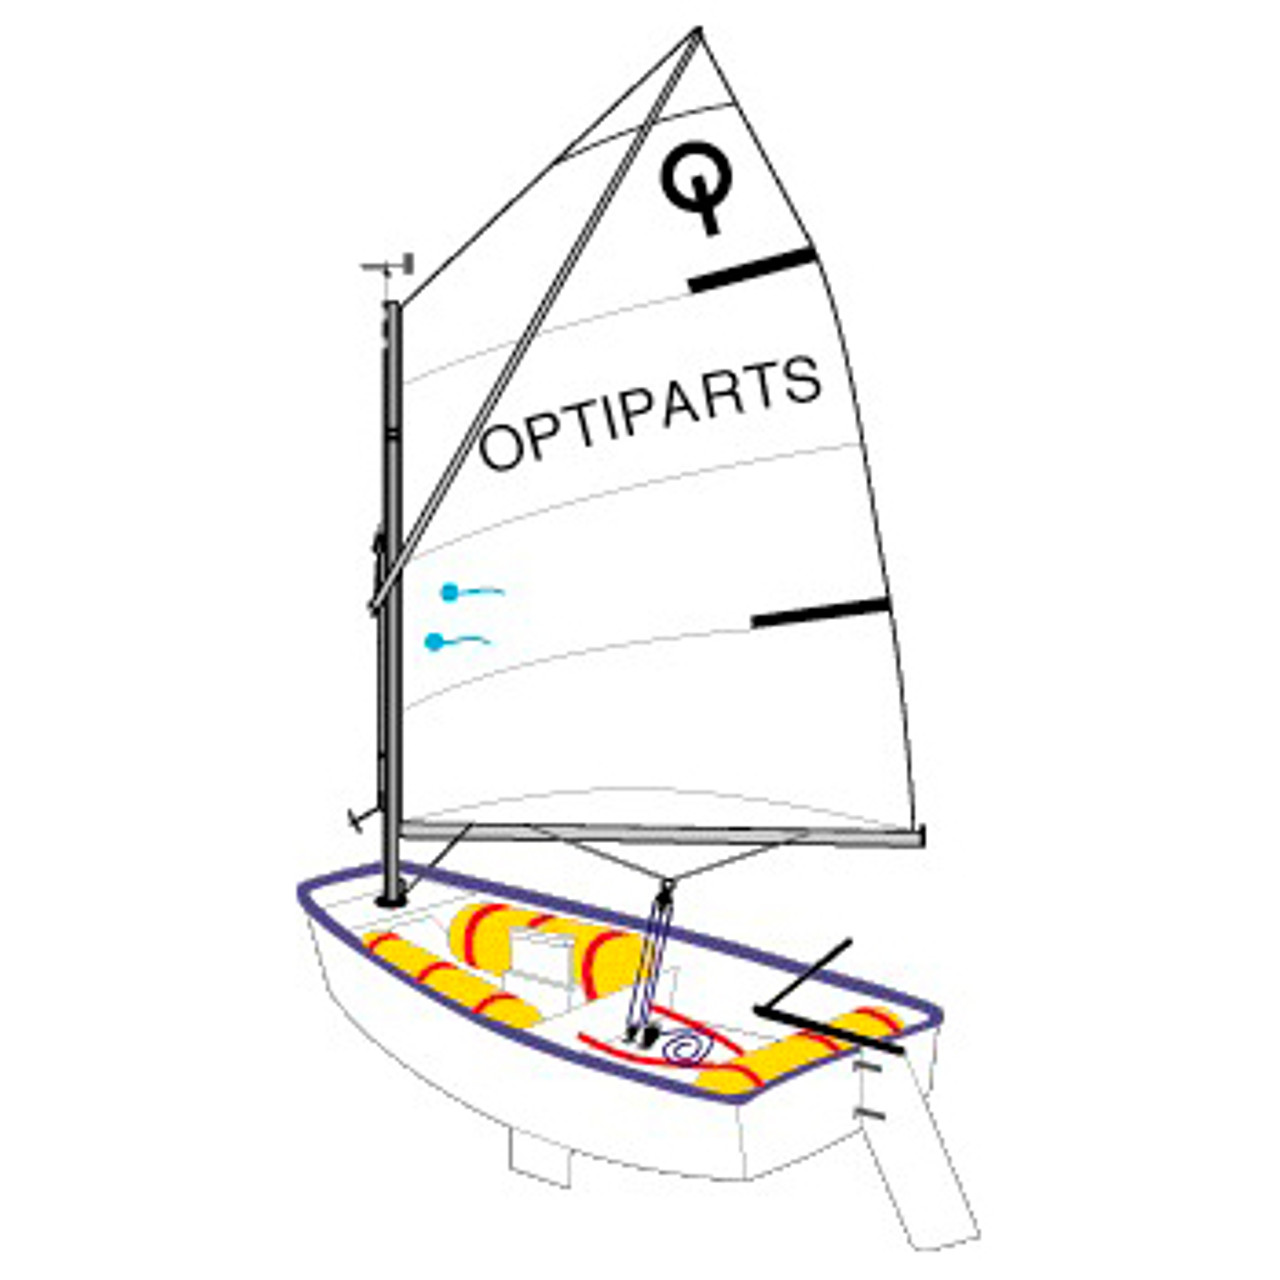 Optiparts Sail, Optiparts Club, no window or class button